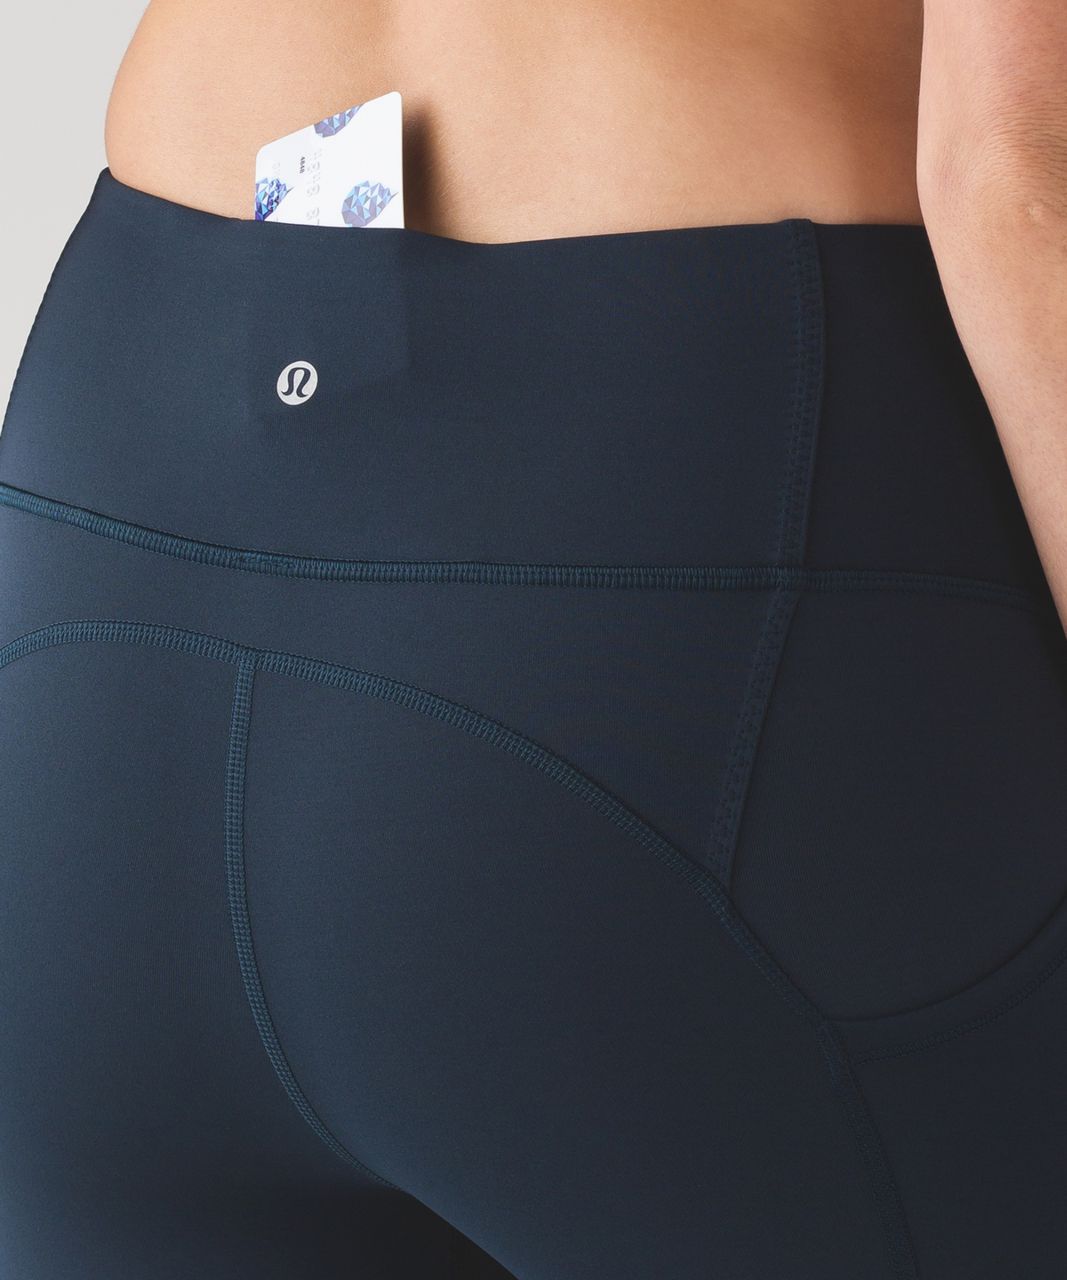 Lululemon All The Right Places Crop II *23" - Nocturnal Teal